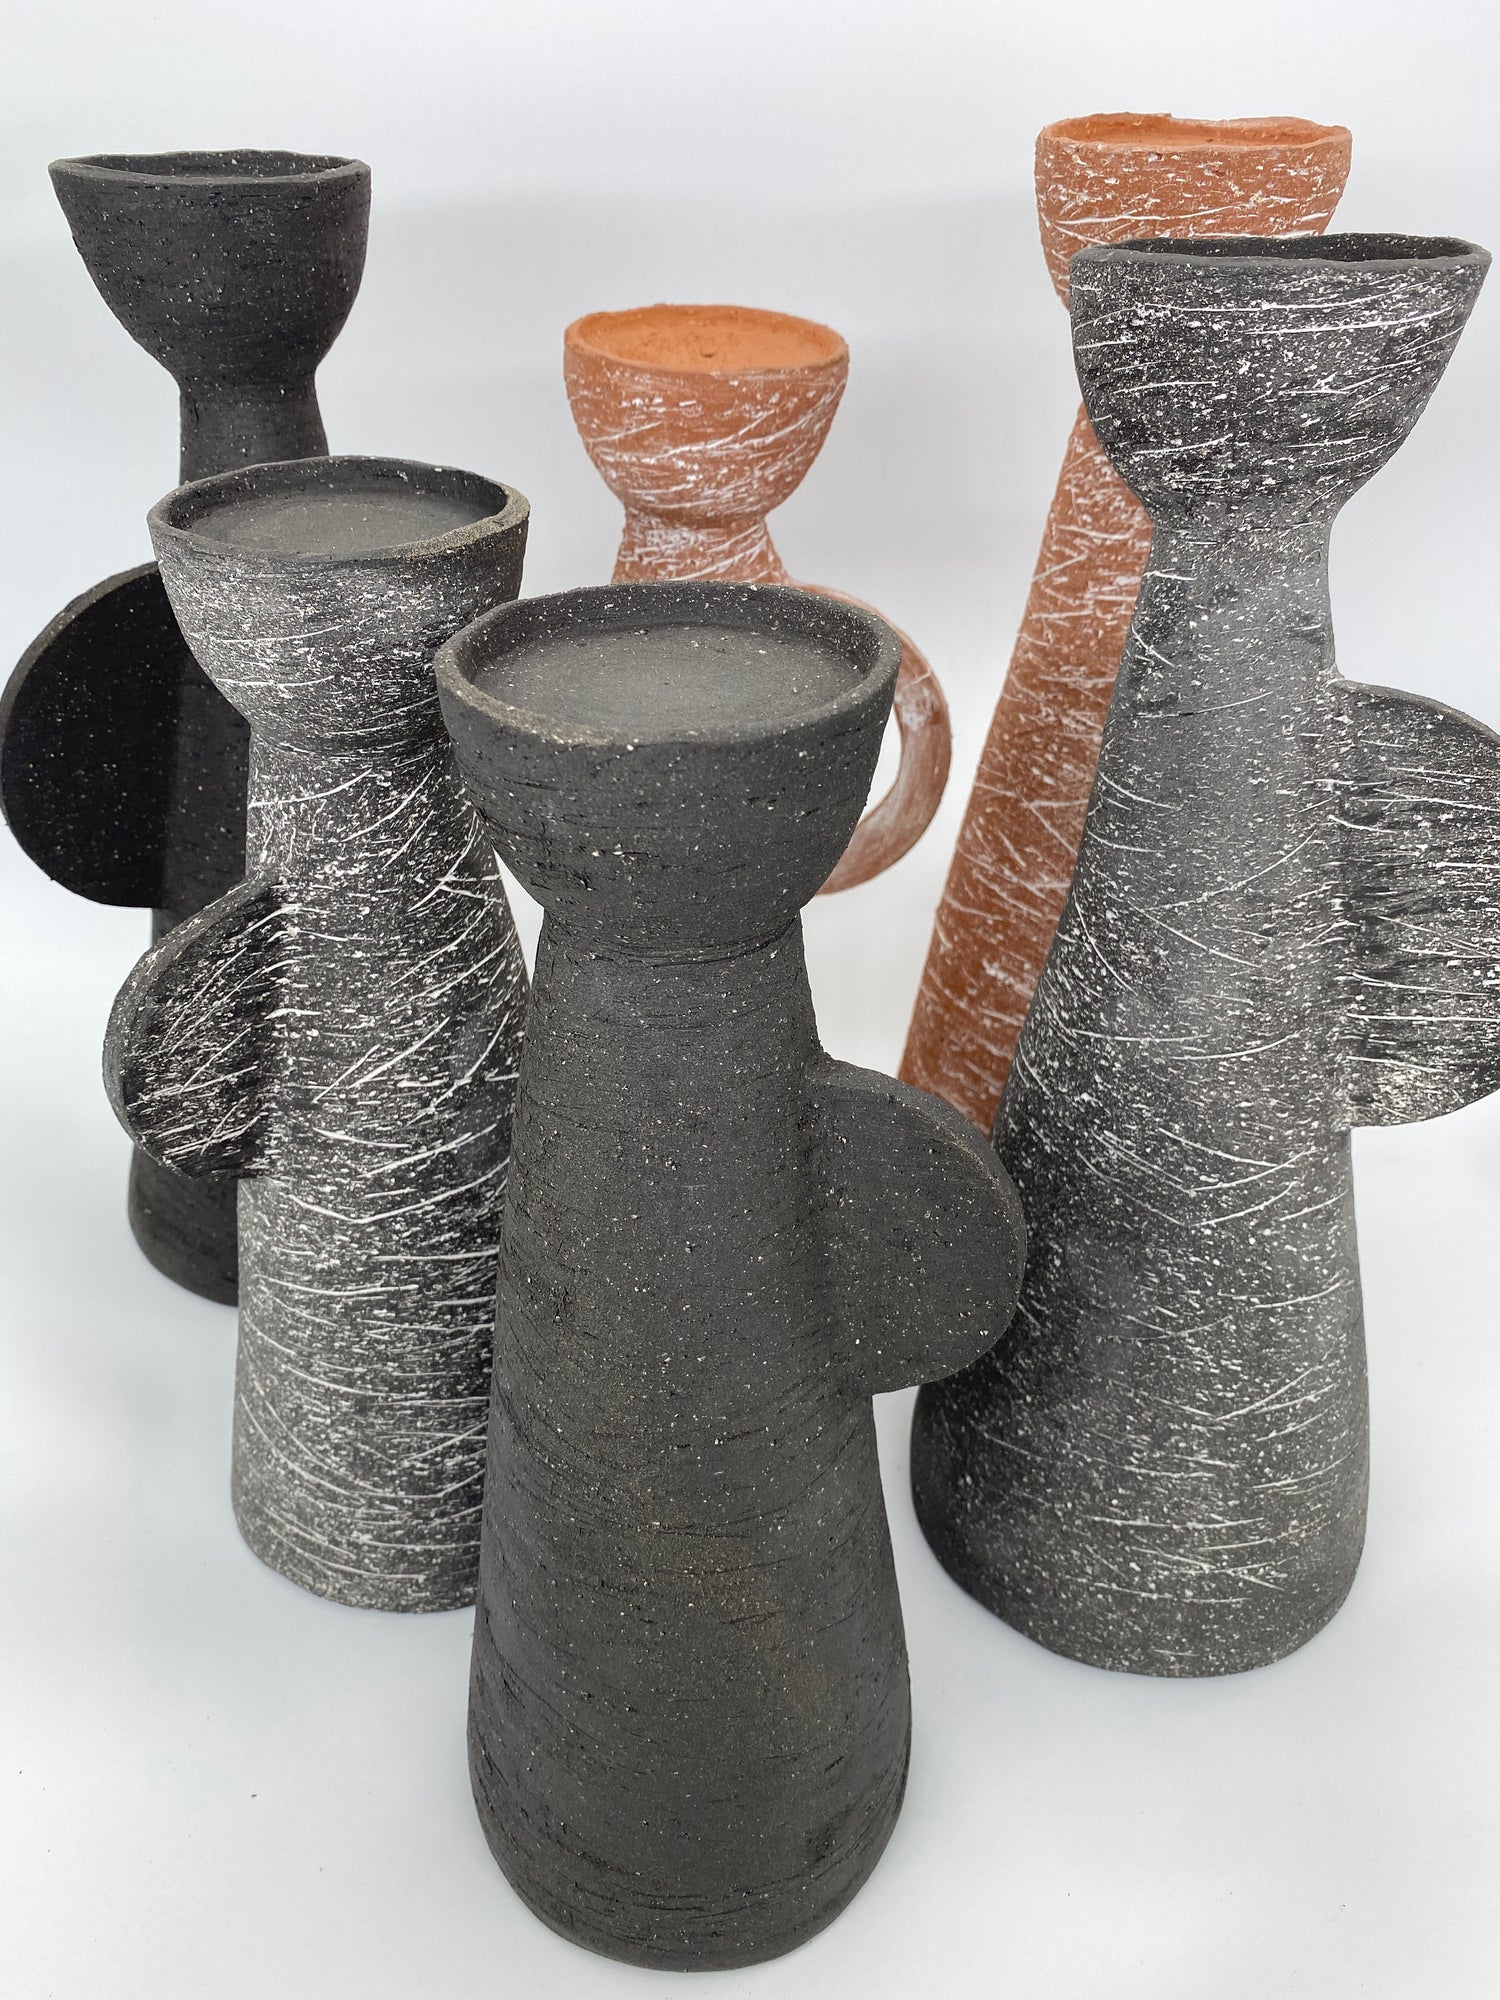 A collection of black and terracotta ceramic vessels